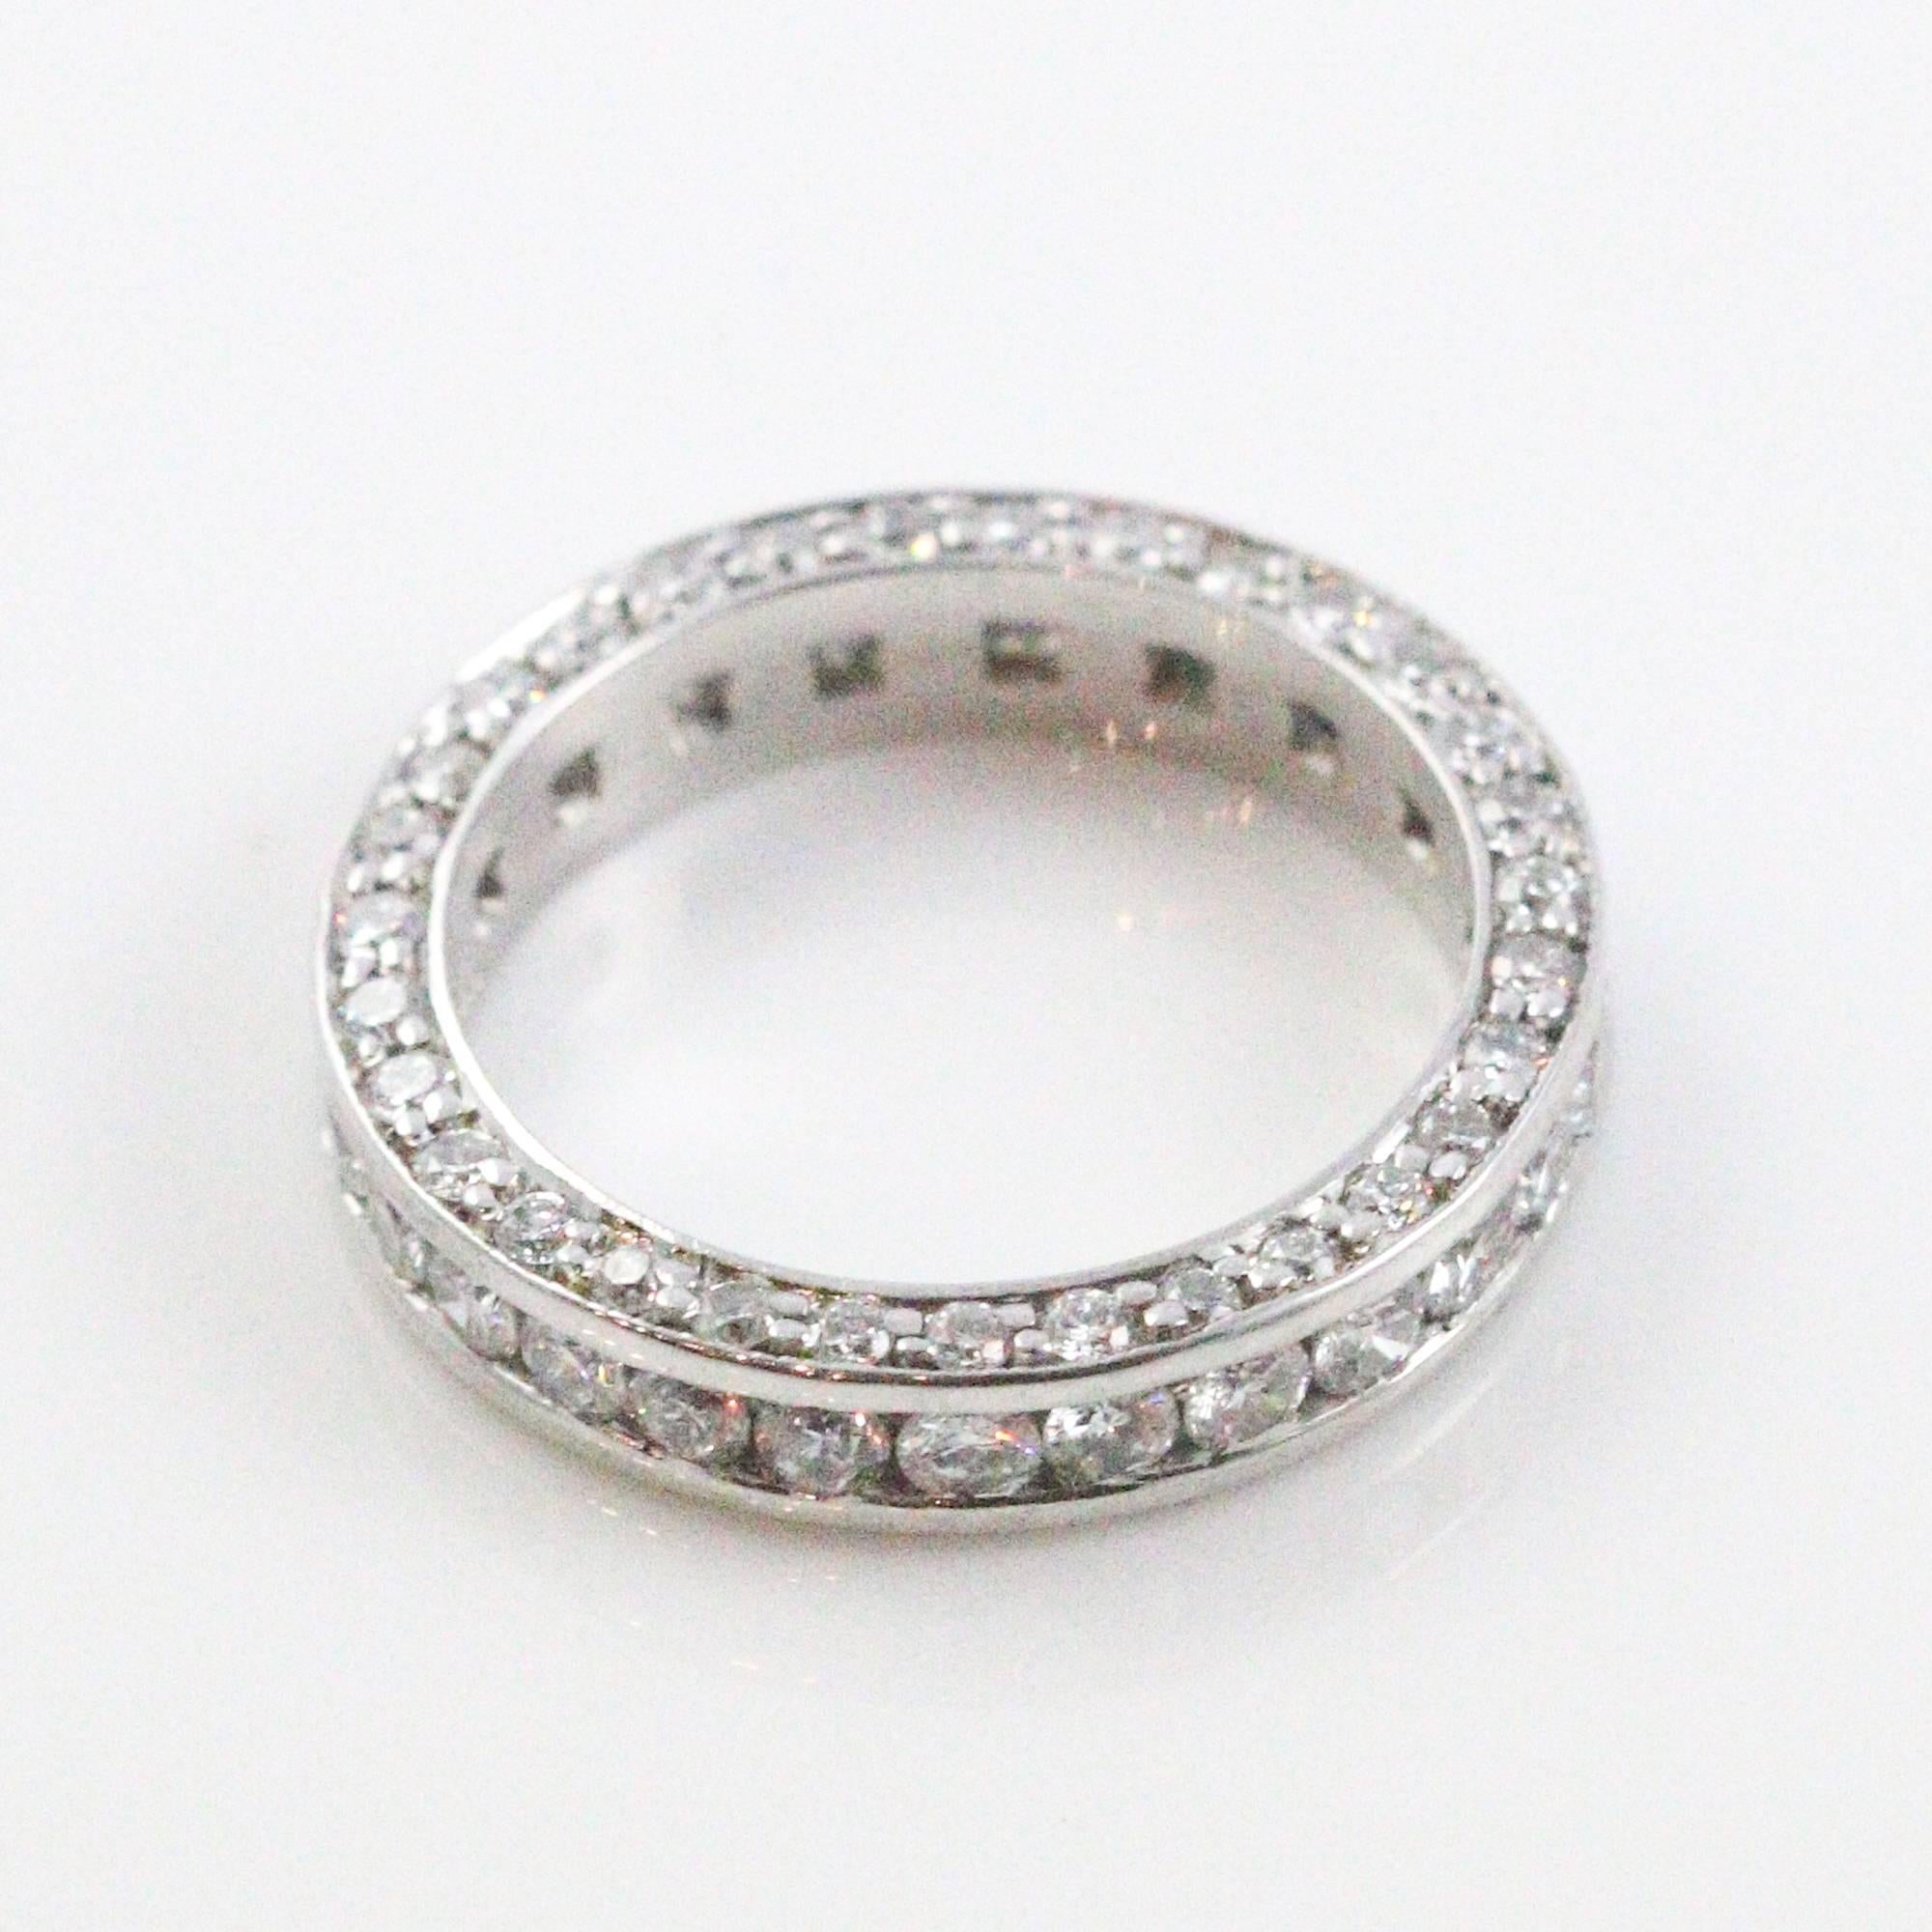 This magnifient eternity band features diamonds on all 3 sides, with channel set round diamonds facing upwards and prong set diamonds lining both sides of the profile. The band features a total of 90 round diamonds, which weigh a combined total of